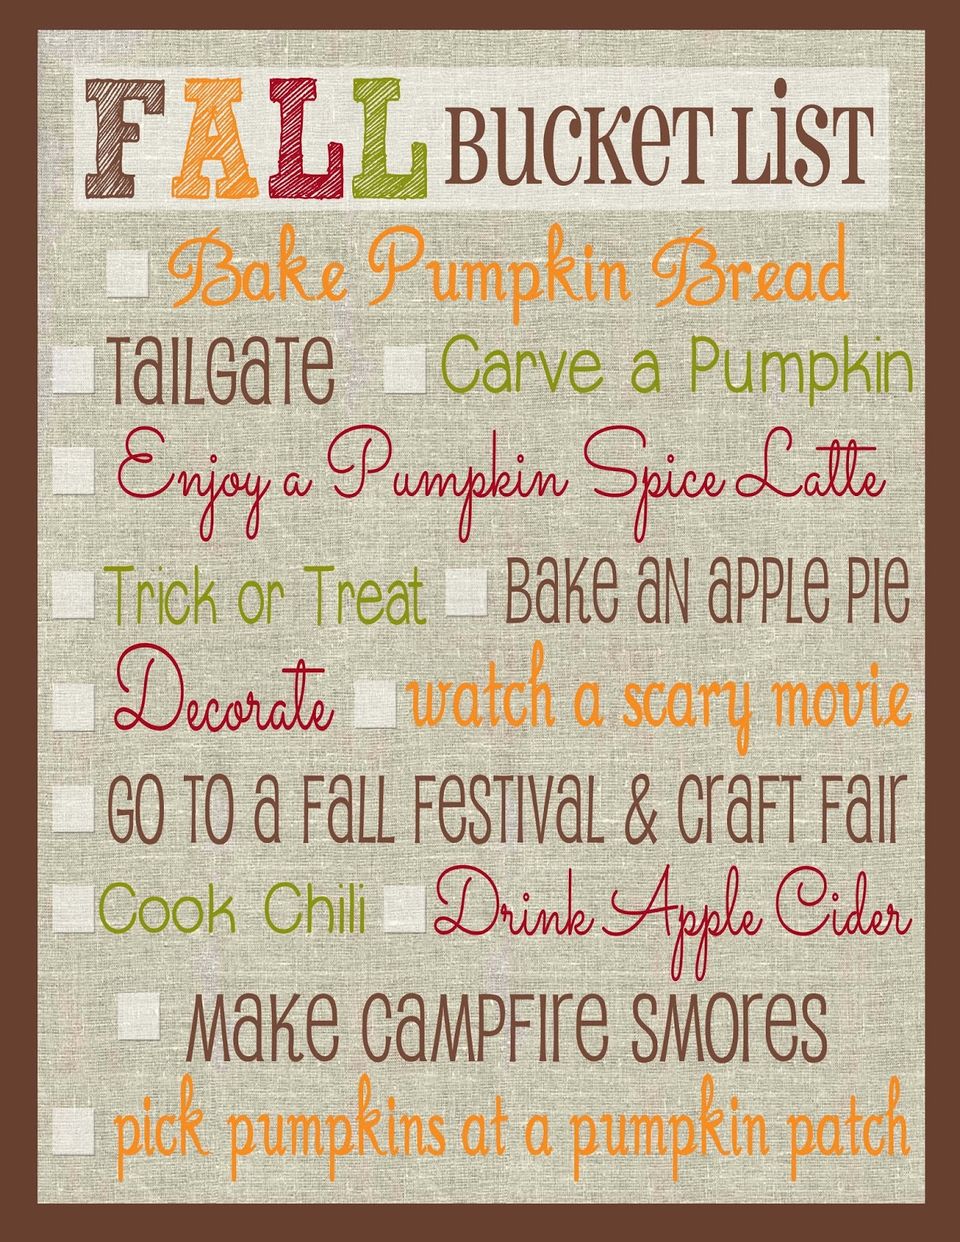 What I Want to Do This Fall (aka Fall Bucket List)